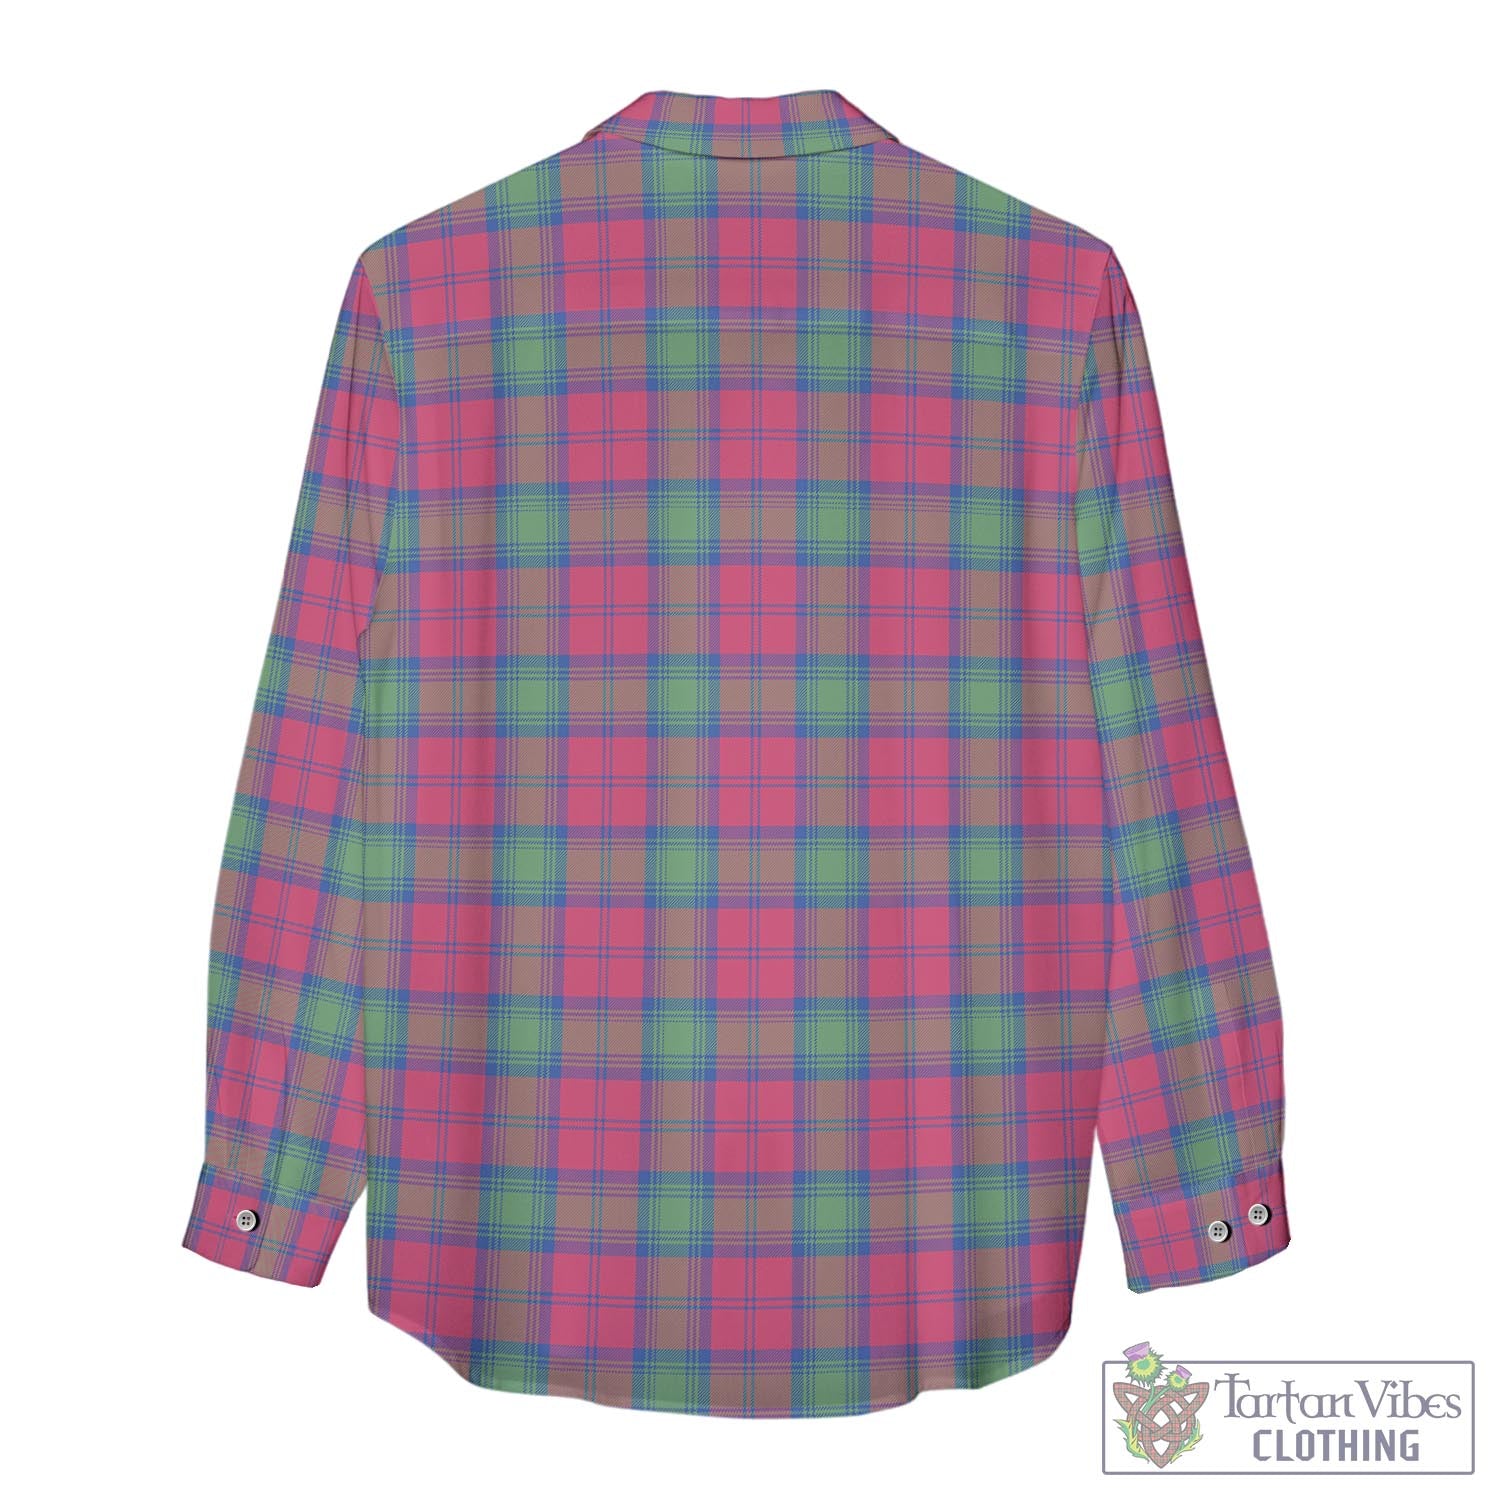 Tartan Vibes Clothing Lindsay Ancient Tartan Womens Casual Shirt with Family Crest